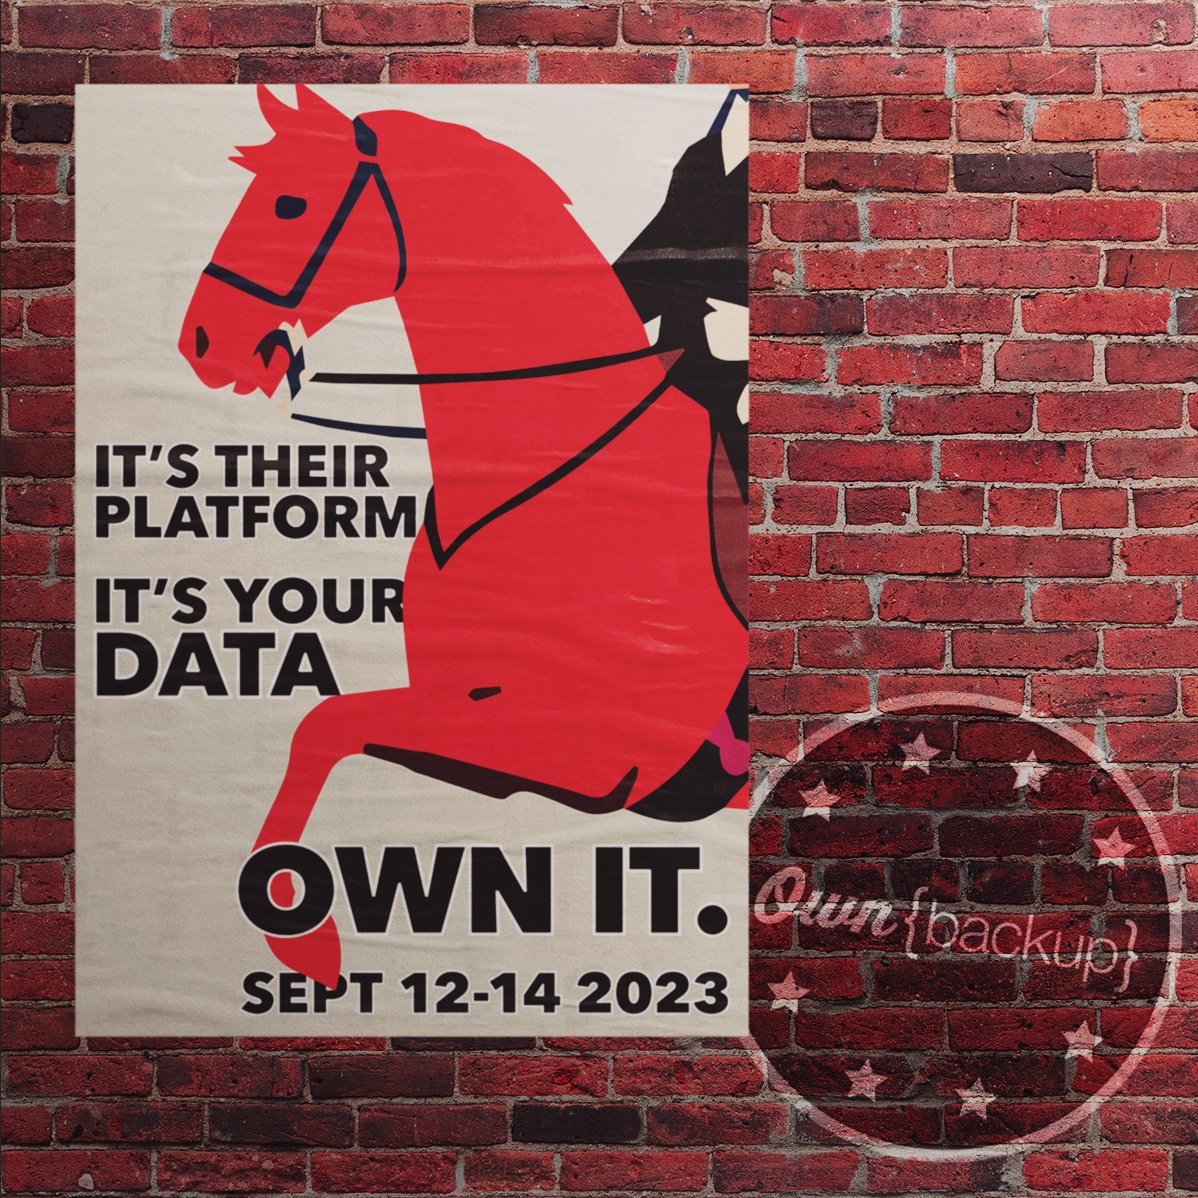 It may be their platform but it's YOUR data... OWN IT! Meet the OwnBackup team at #Dreamforce23 to learn the importance of data independence. Click here to set up a meeting with us at Dreamforce: ownbackup.com/dreamforce-2023 #OwnBackup #OWNDF23 #DF23